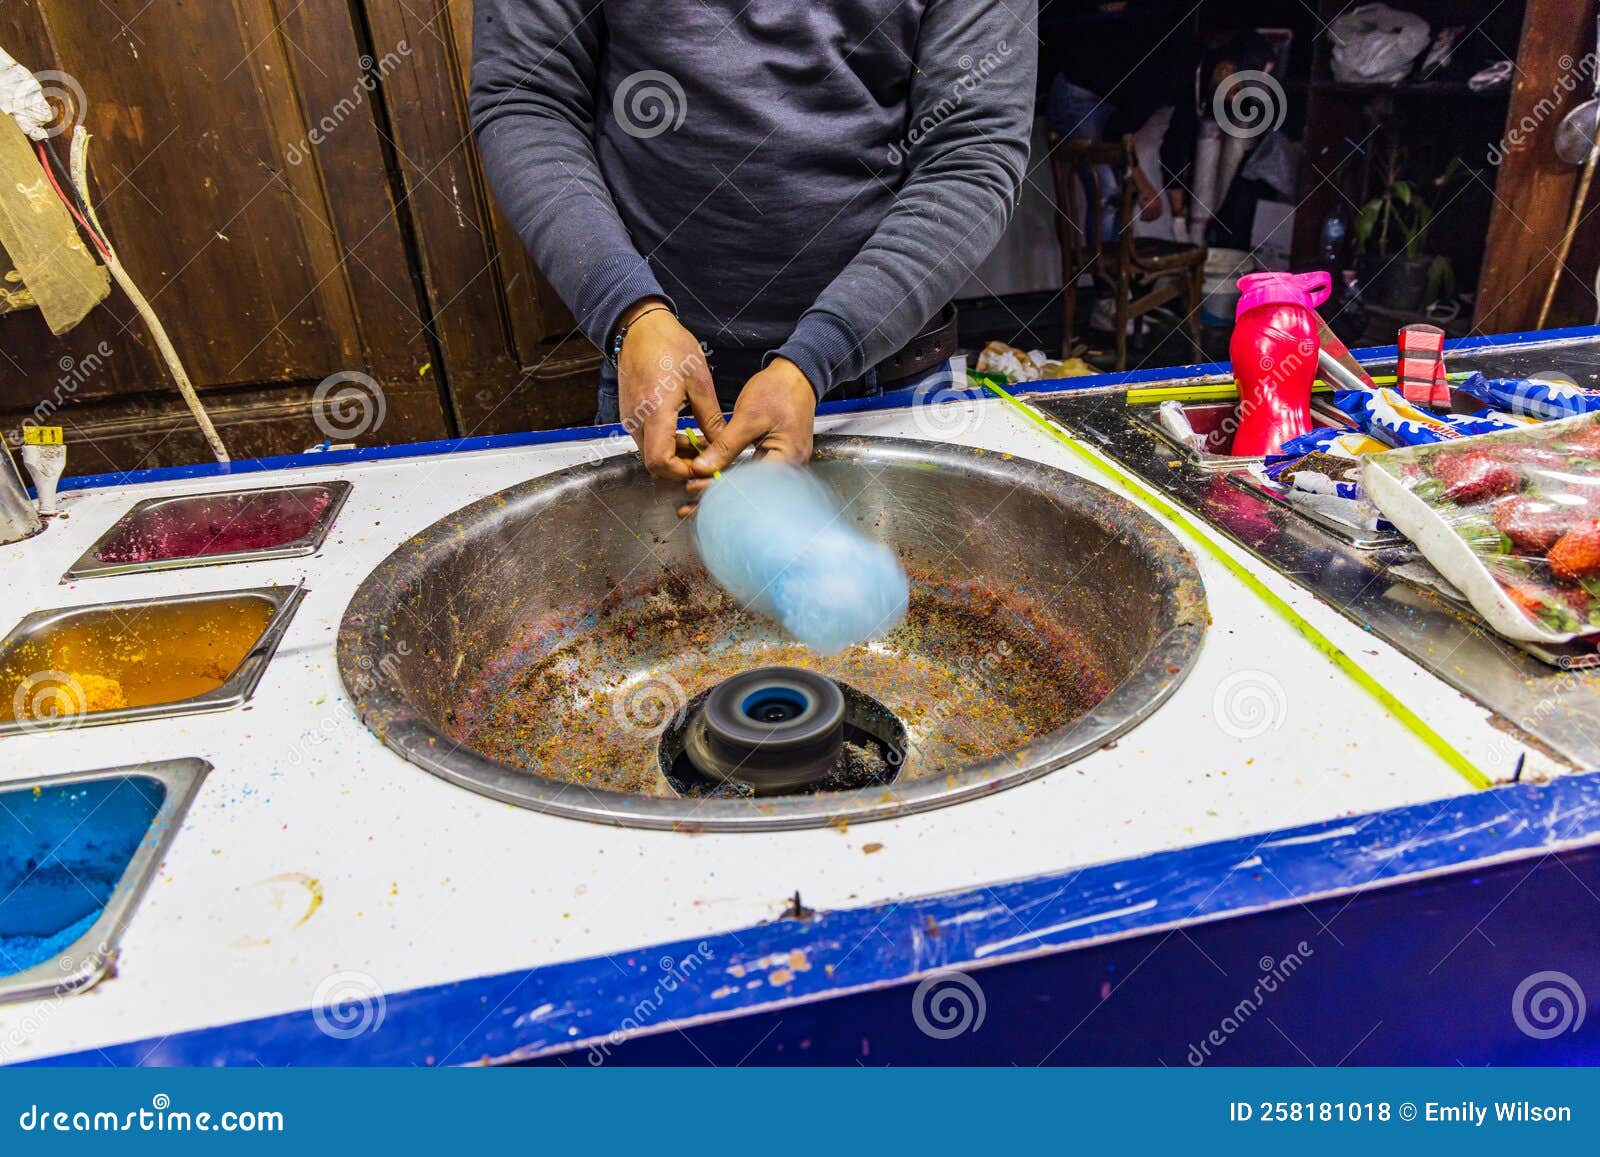 man making spun sugar, cotton candy, at a shop on el moez street in old cairo